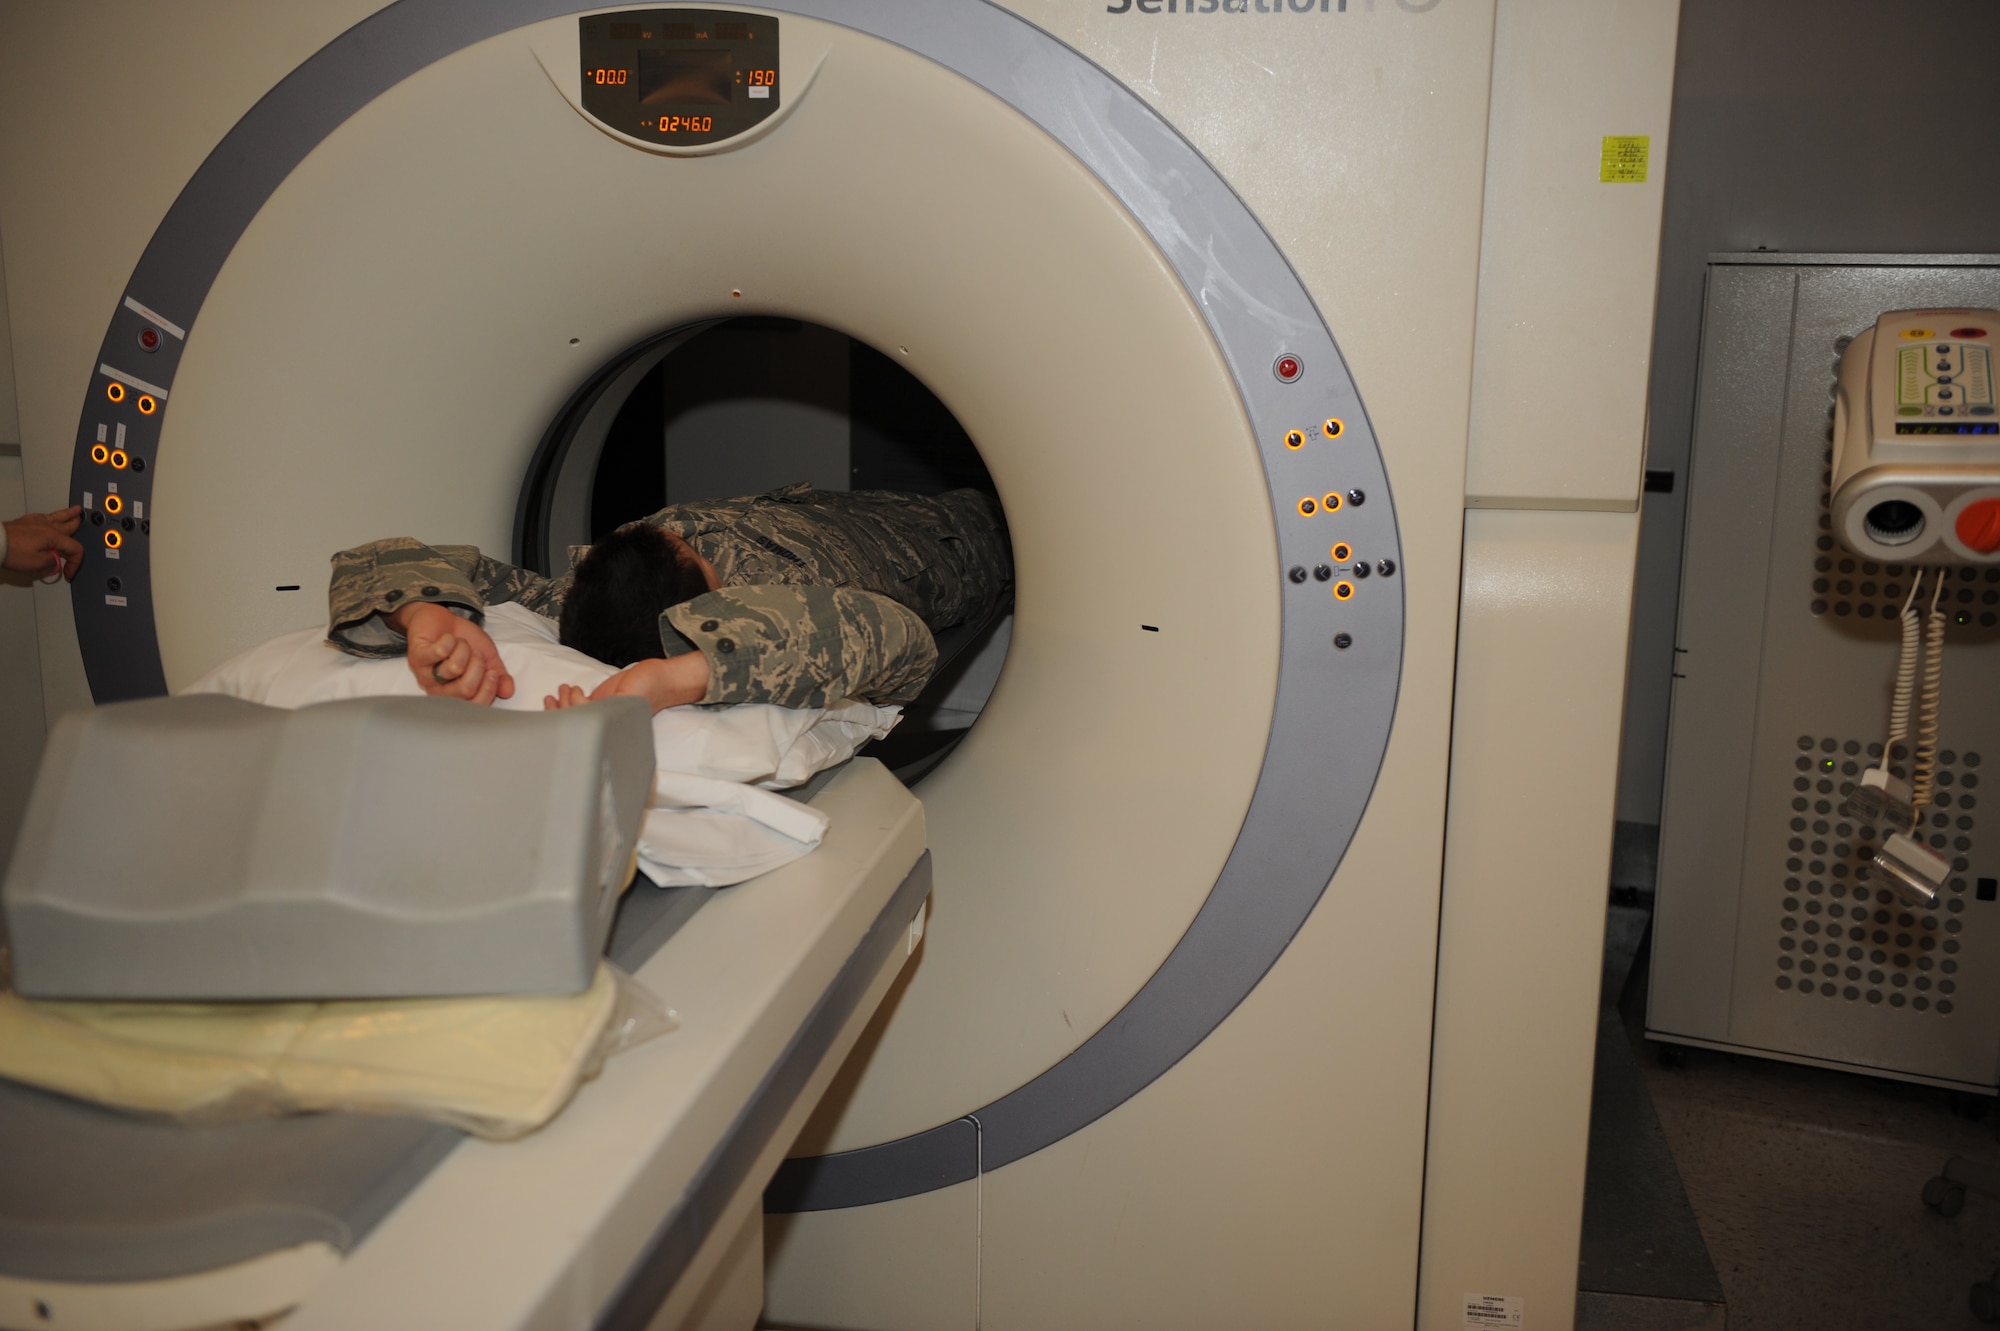 A patient at the 375th Medical Support Squadron Diagnostic Imaging Flight receives a Computerized Axial Tomography scan, otherwise known as a CAT or CT scan. CAT scans are used to create a 3-dimensional picture of any part of the body. (U.S Air Force photo/Staff Sgt. Teresa M. Jennings)